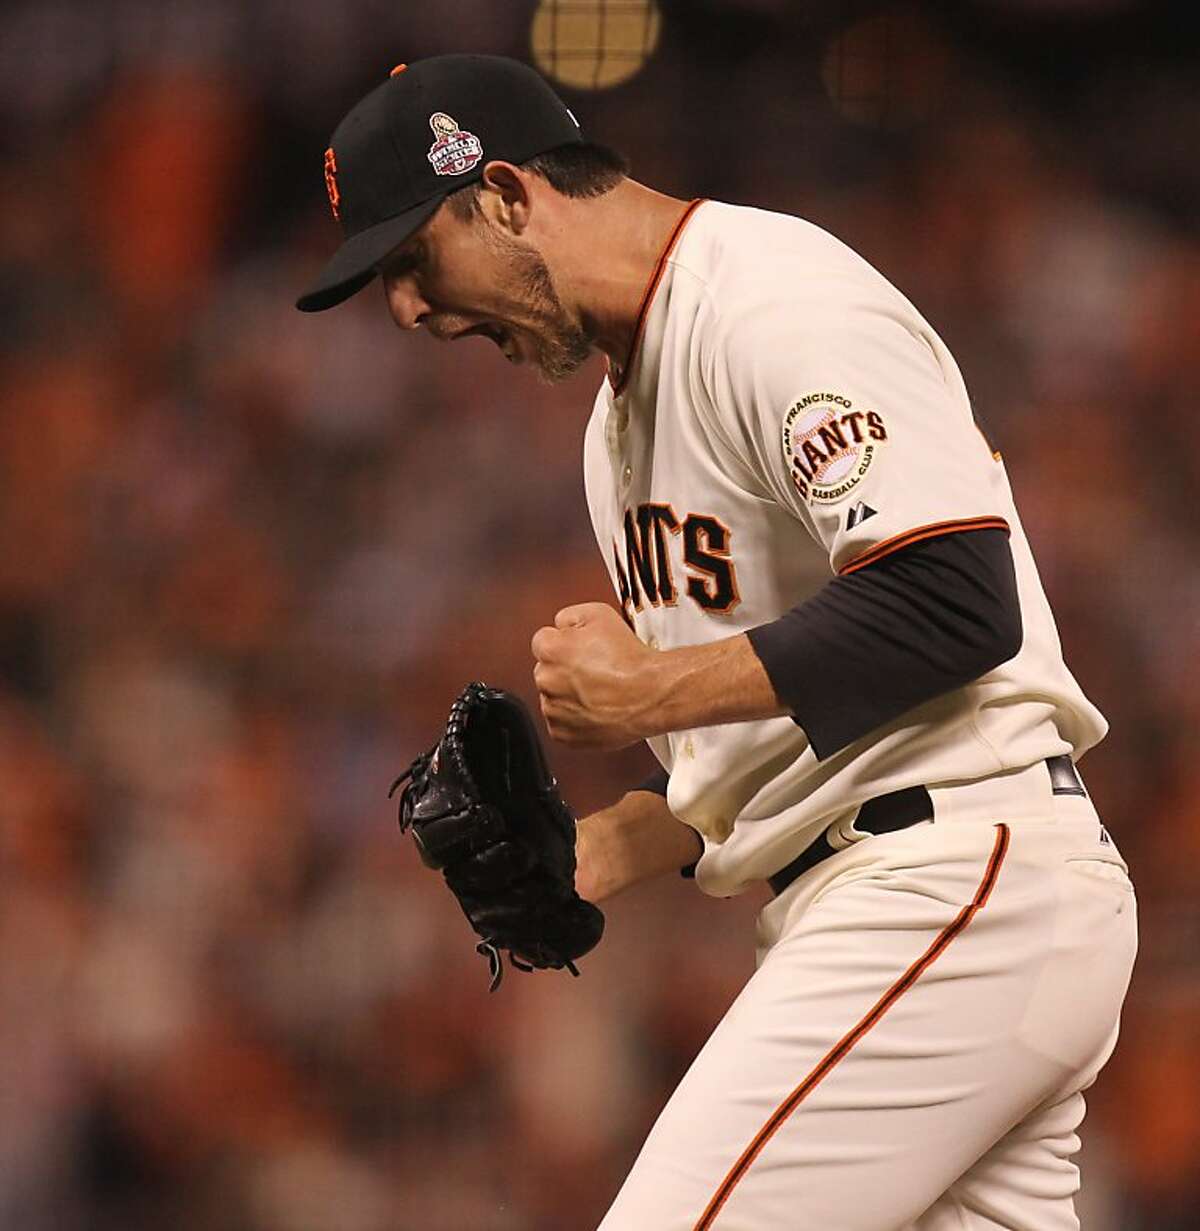 Giants' pitcher Madison Bumgarner reacts after retiring the side in the 6th inning during game 2 of the World Series at AT&T Park on Thursday, Oct. 25, 2012 in San Francisco, Calif.